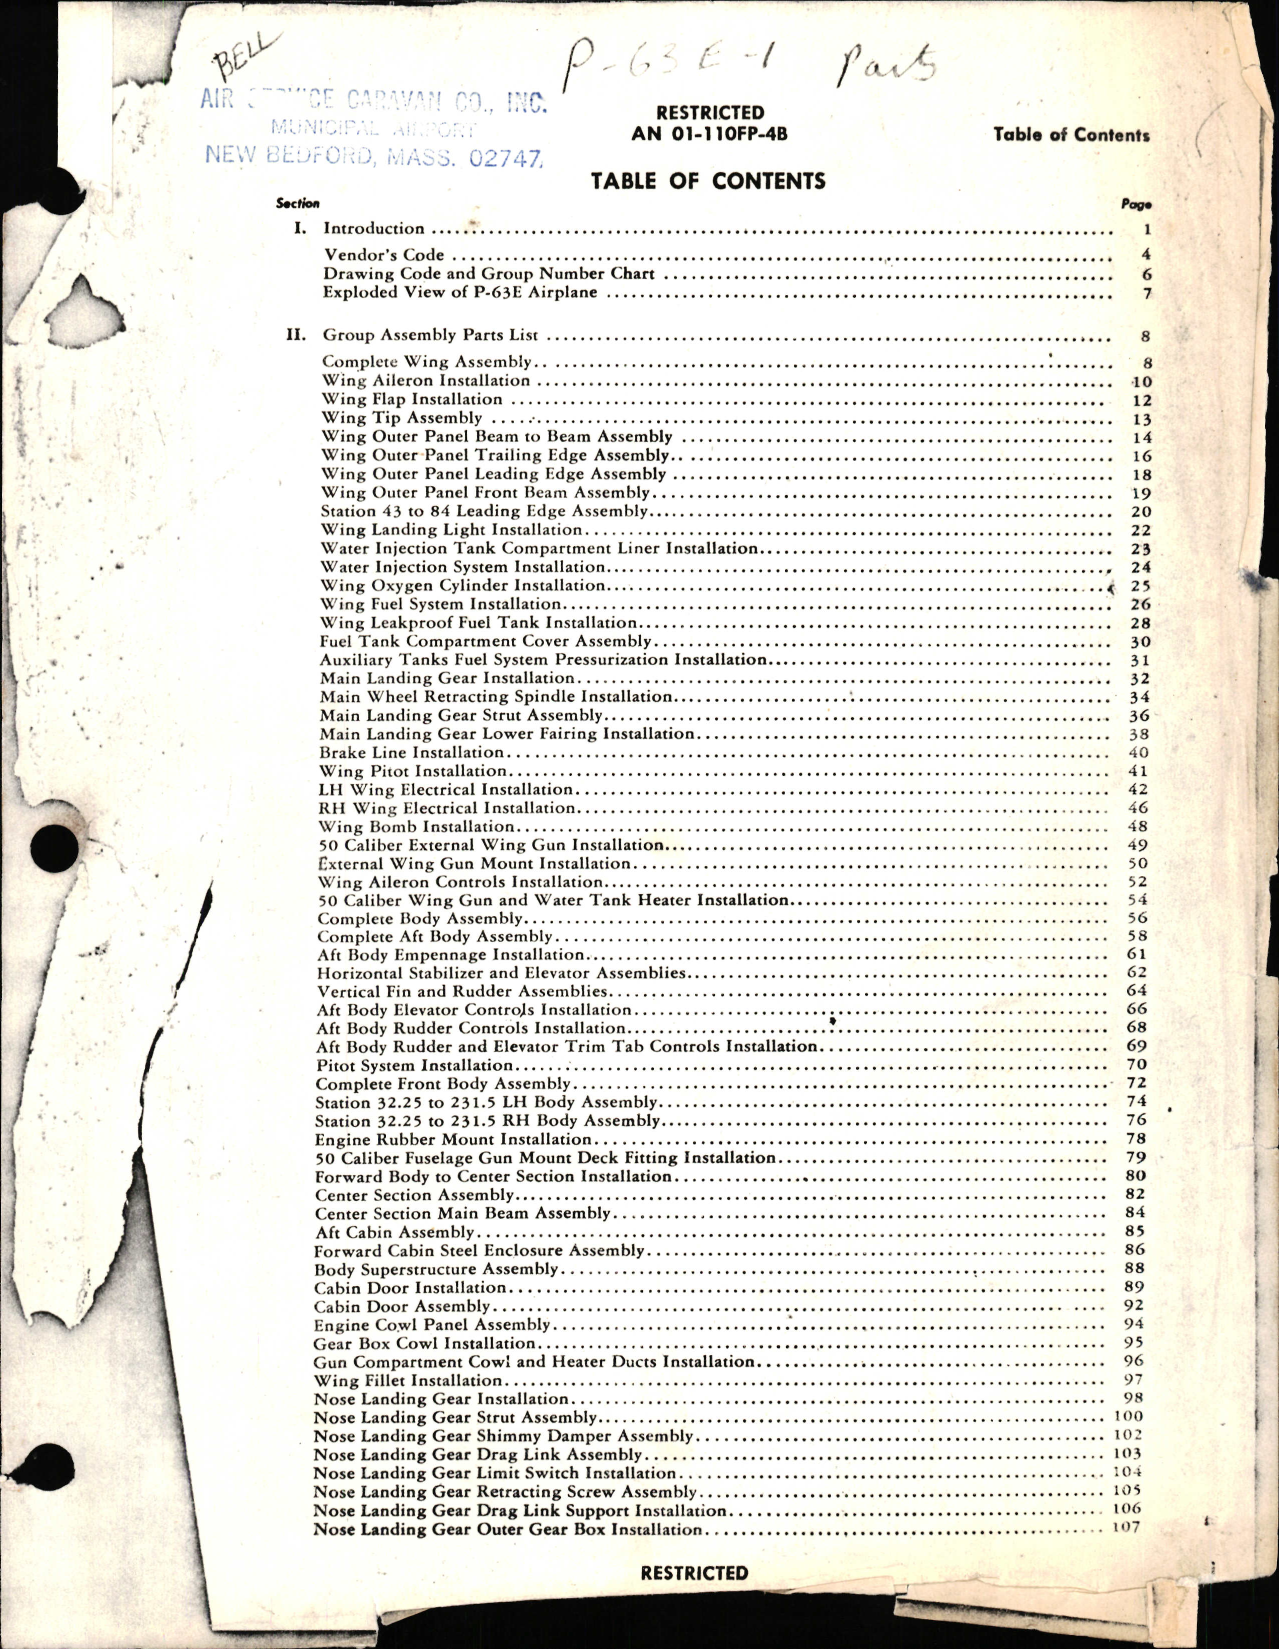 Sample page 1 from AirCorps Library document: Illustrated Parts Catalog for P-63E, WOTN